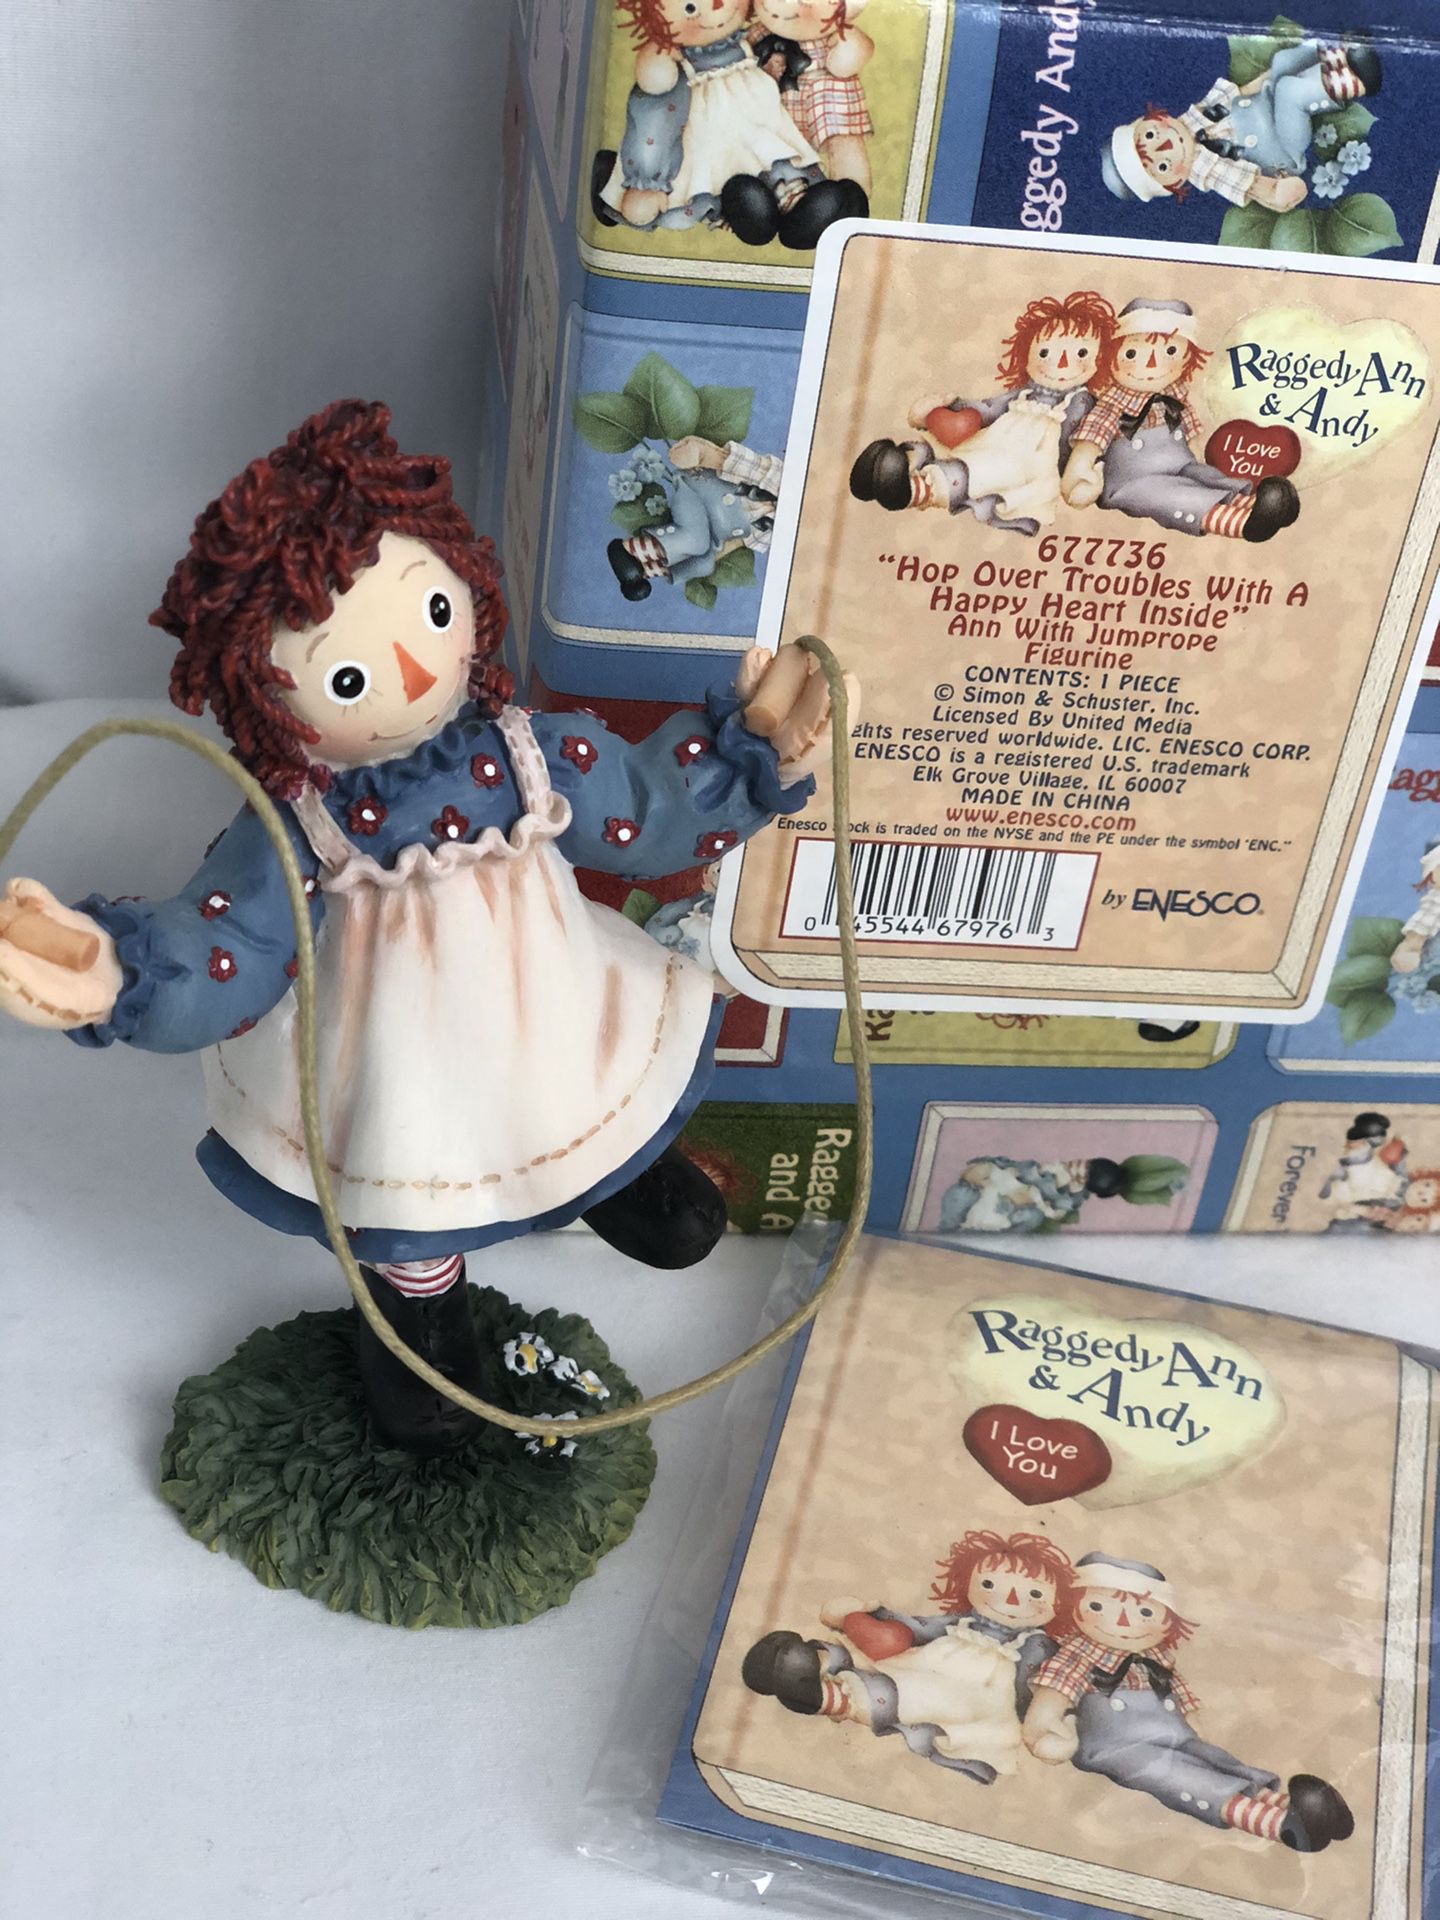 Vtg. Raggedy Ann And Andy Figurine 677736 “ Hop Over Troubles...”